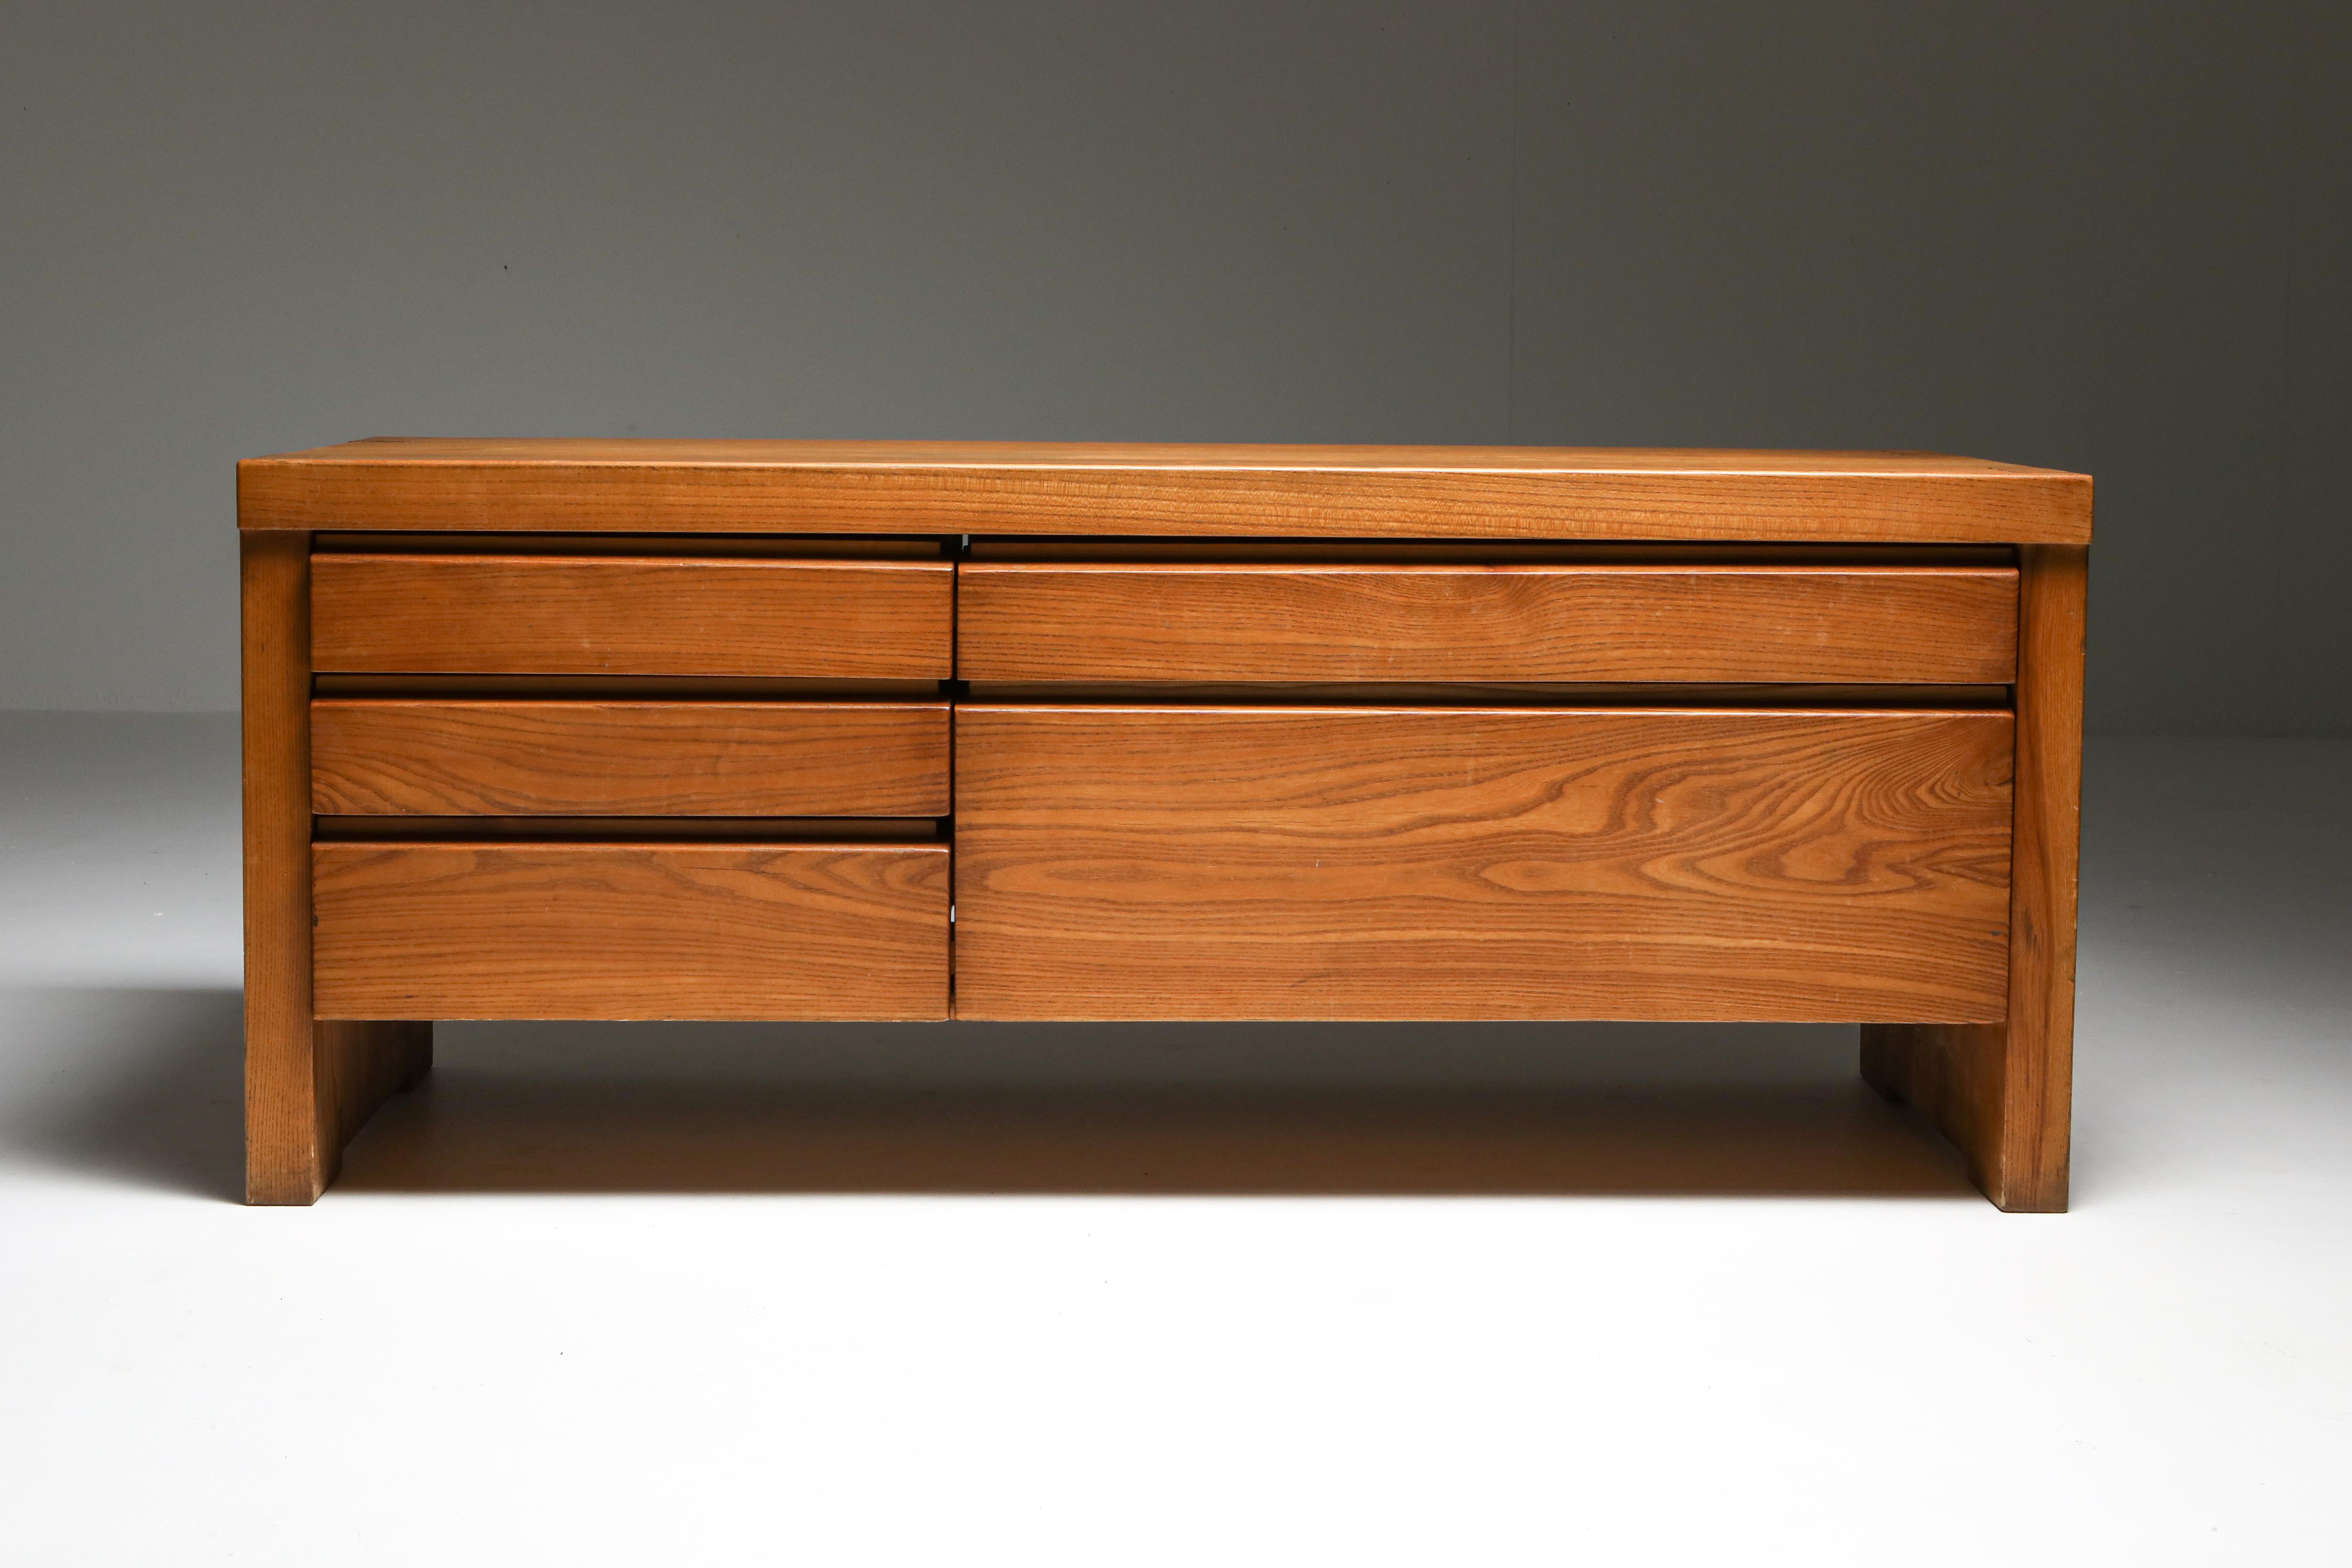 Lowboard, Pierre Chapo (1927-1987) French architect and master furniture maker, model R14, French Elm

Mid-Century Modern important sought after design piece.
Designed in 1965, the R14 cabinet upset the codes for this type of furniture.
R14 was